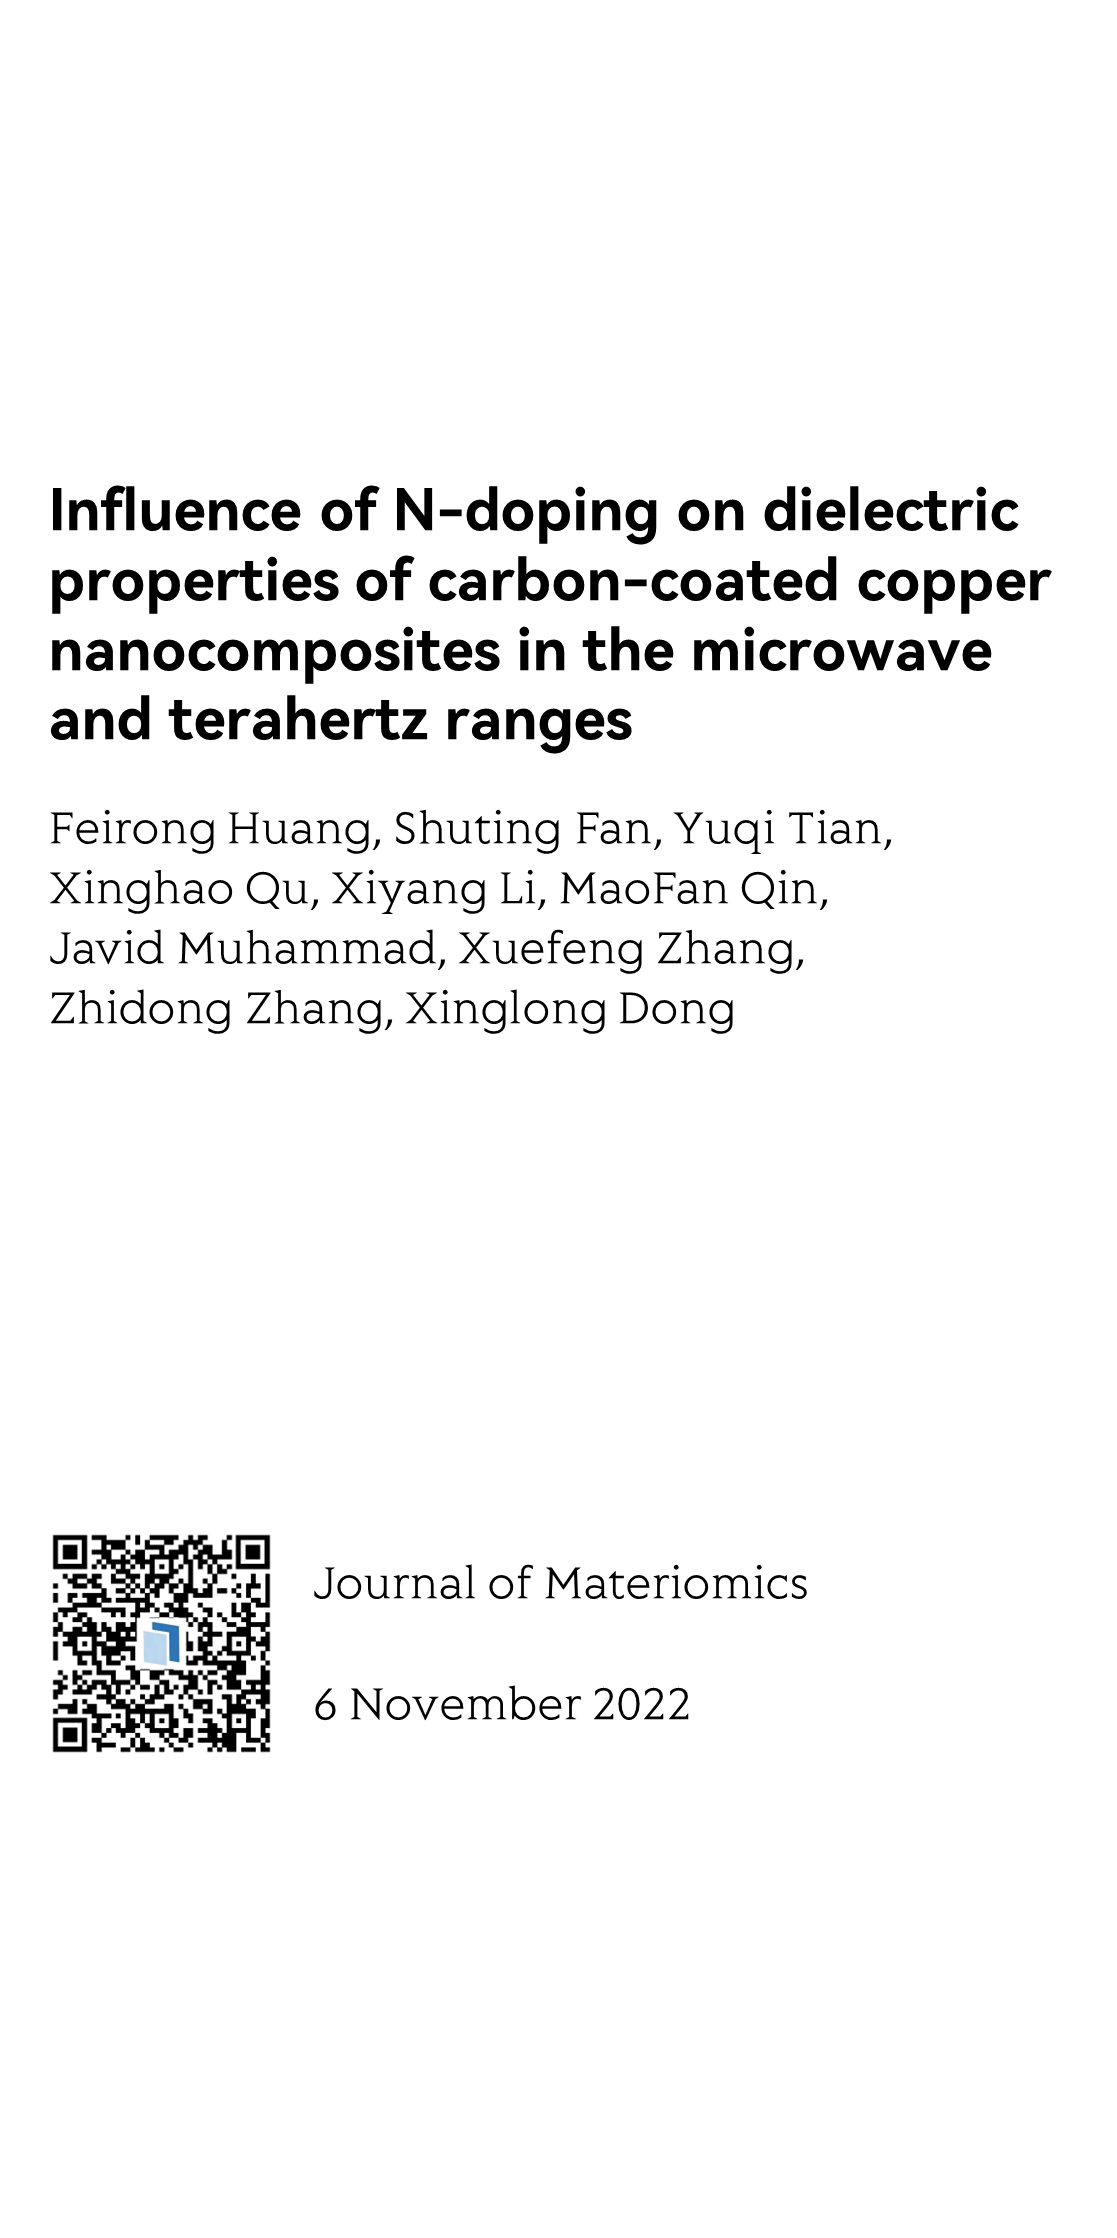 Influence of N-doping on dielectric properties of carbon-coated copper nanocomposites in the microwave and terahertz ranges_1